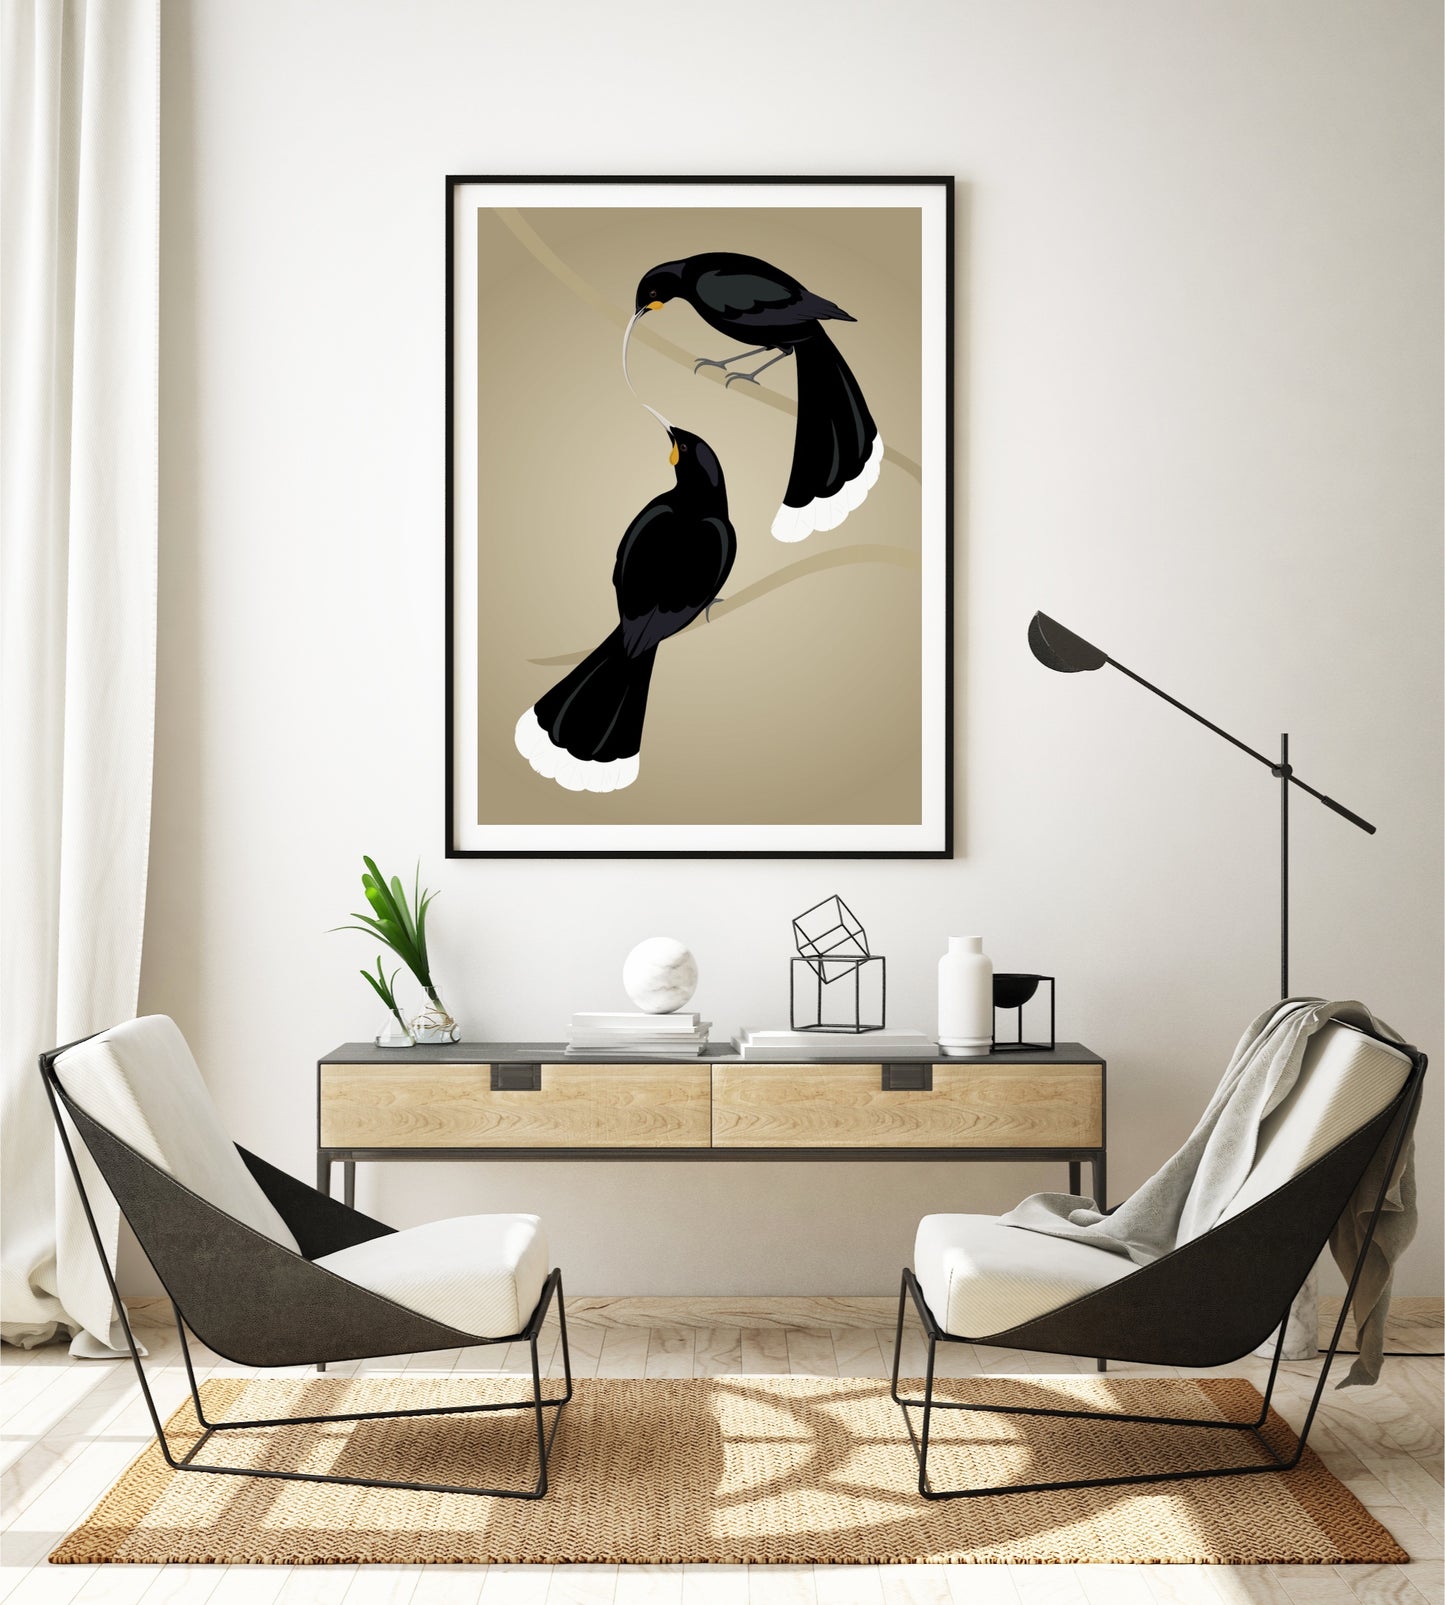 A0 Framed art print of the Huia birds of New Zealand, by Hansby Design